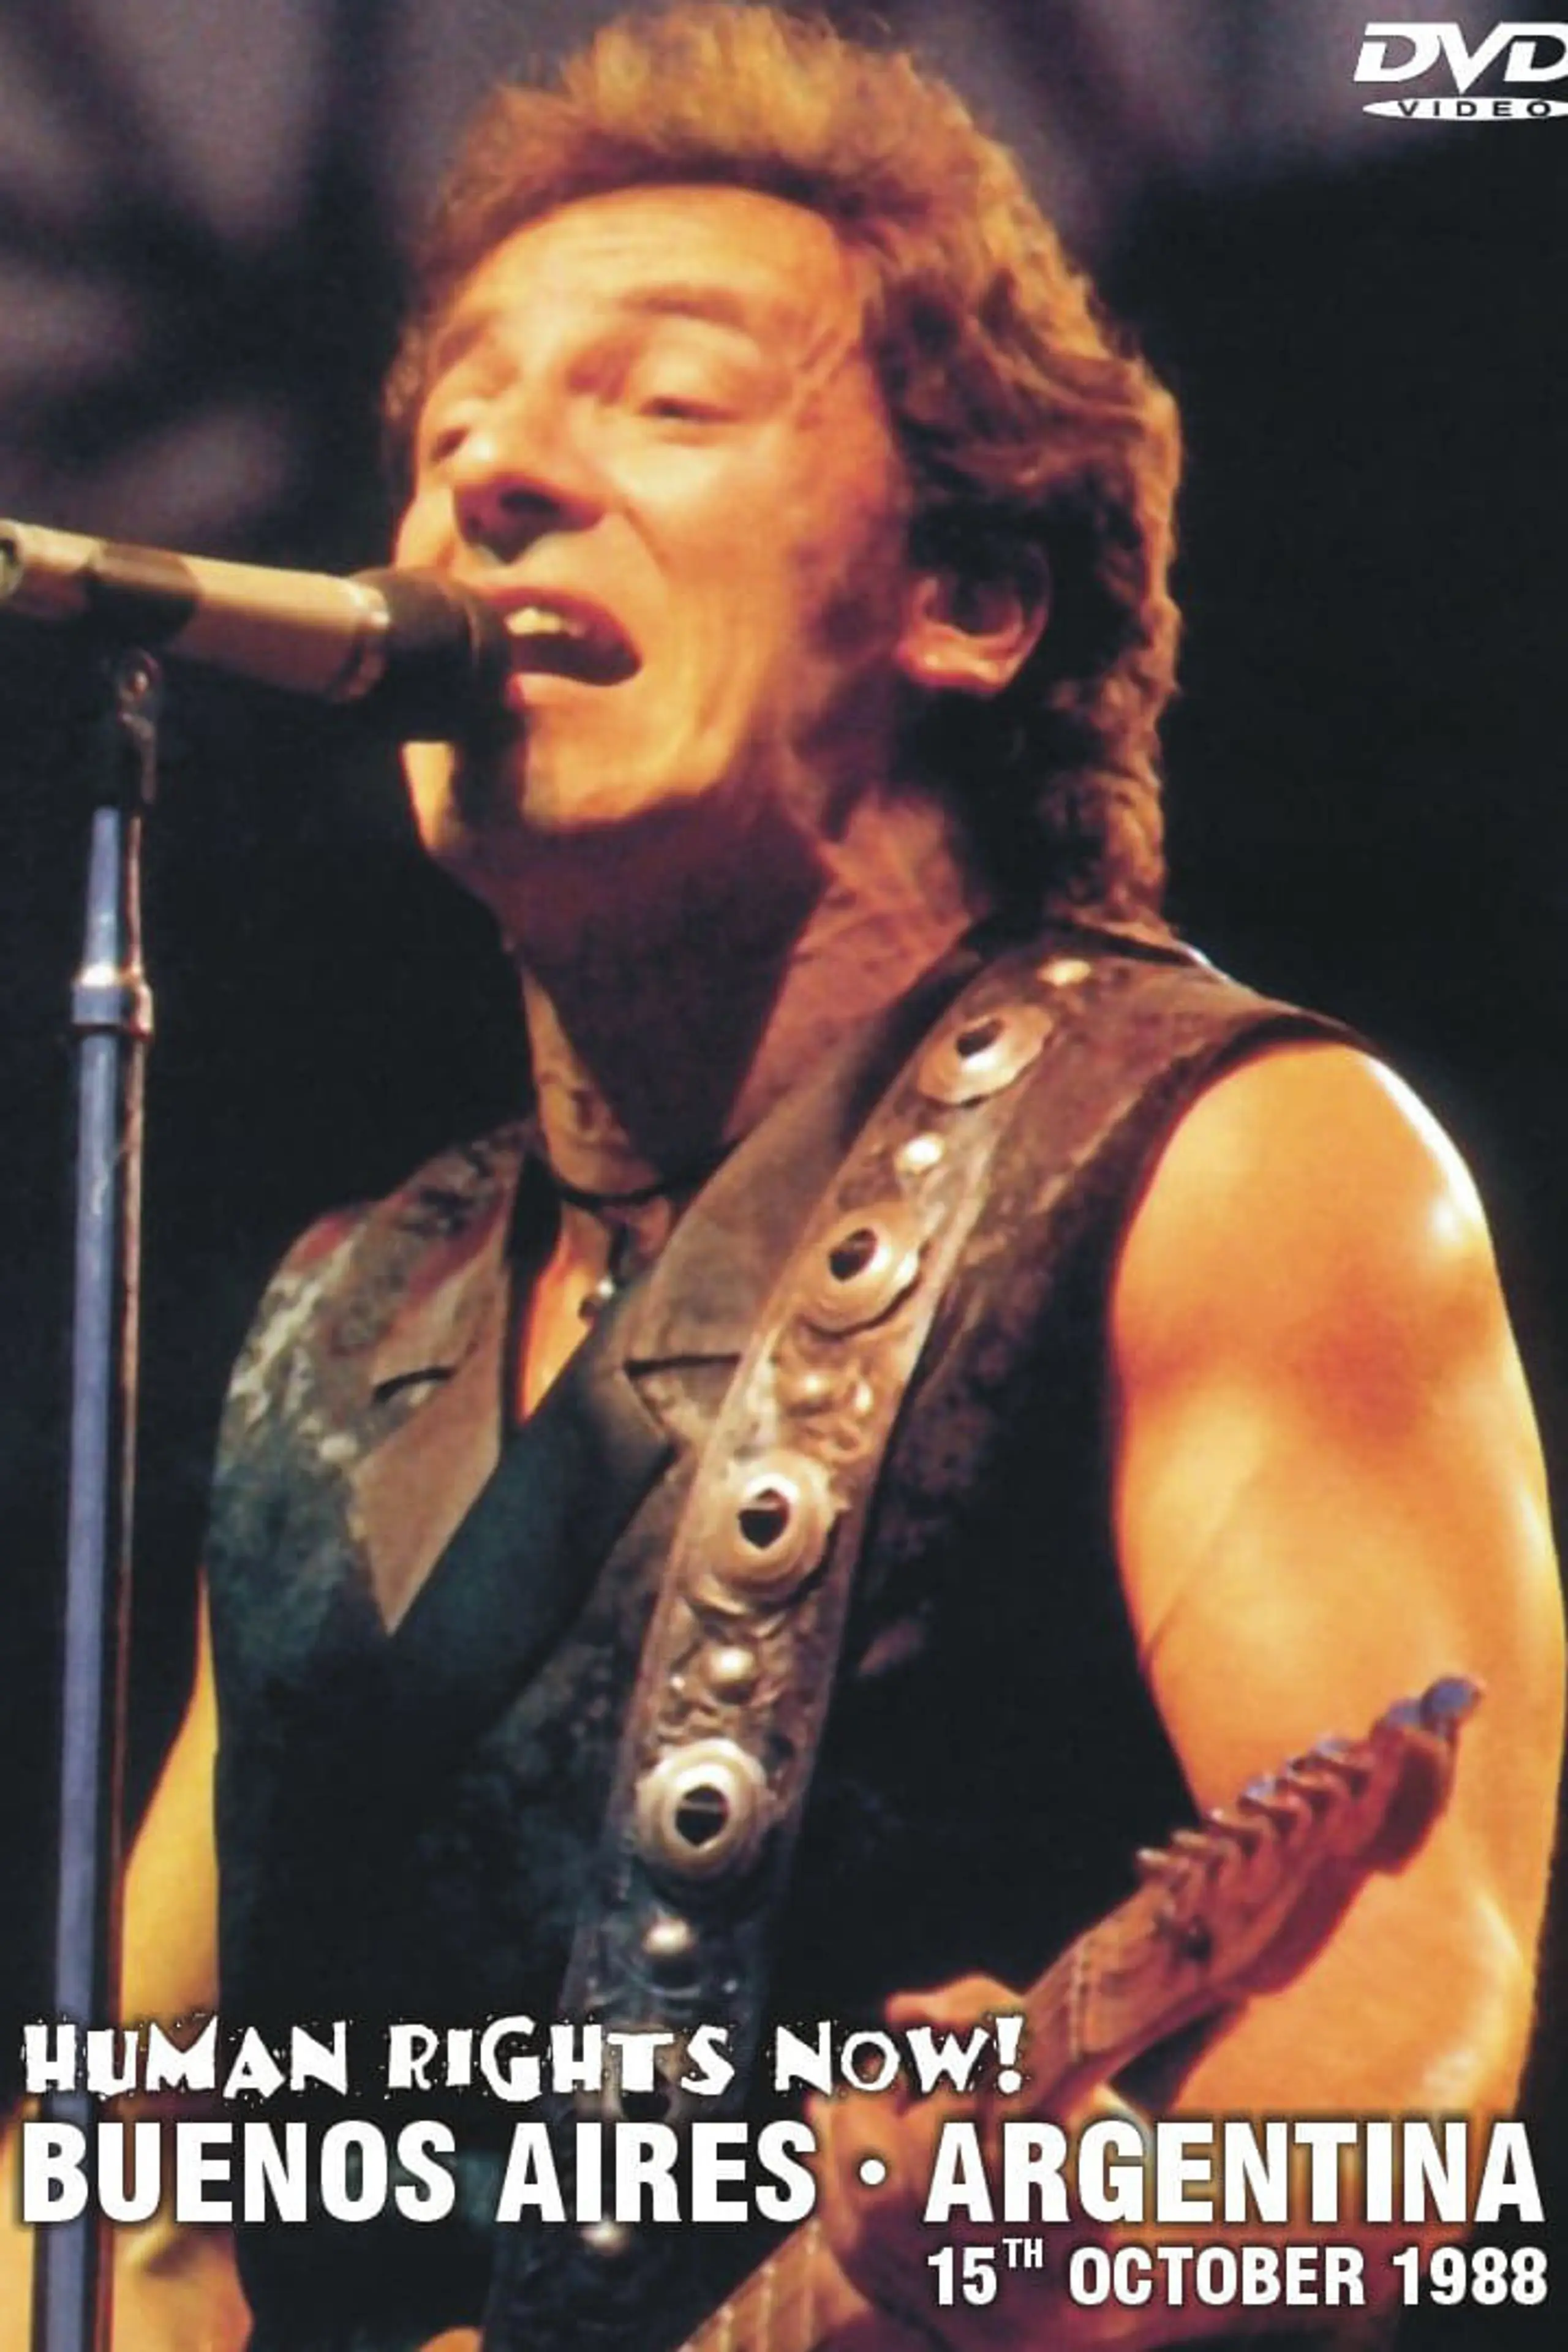 Bruce Springsteen - Human Rights Final - Buenos Aires